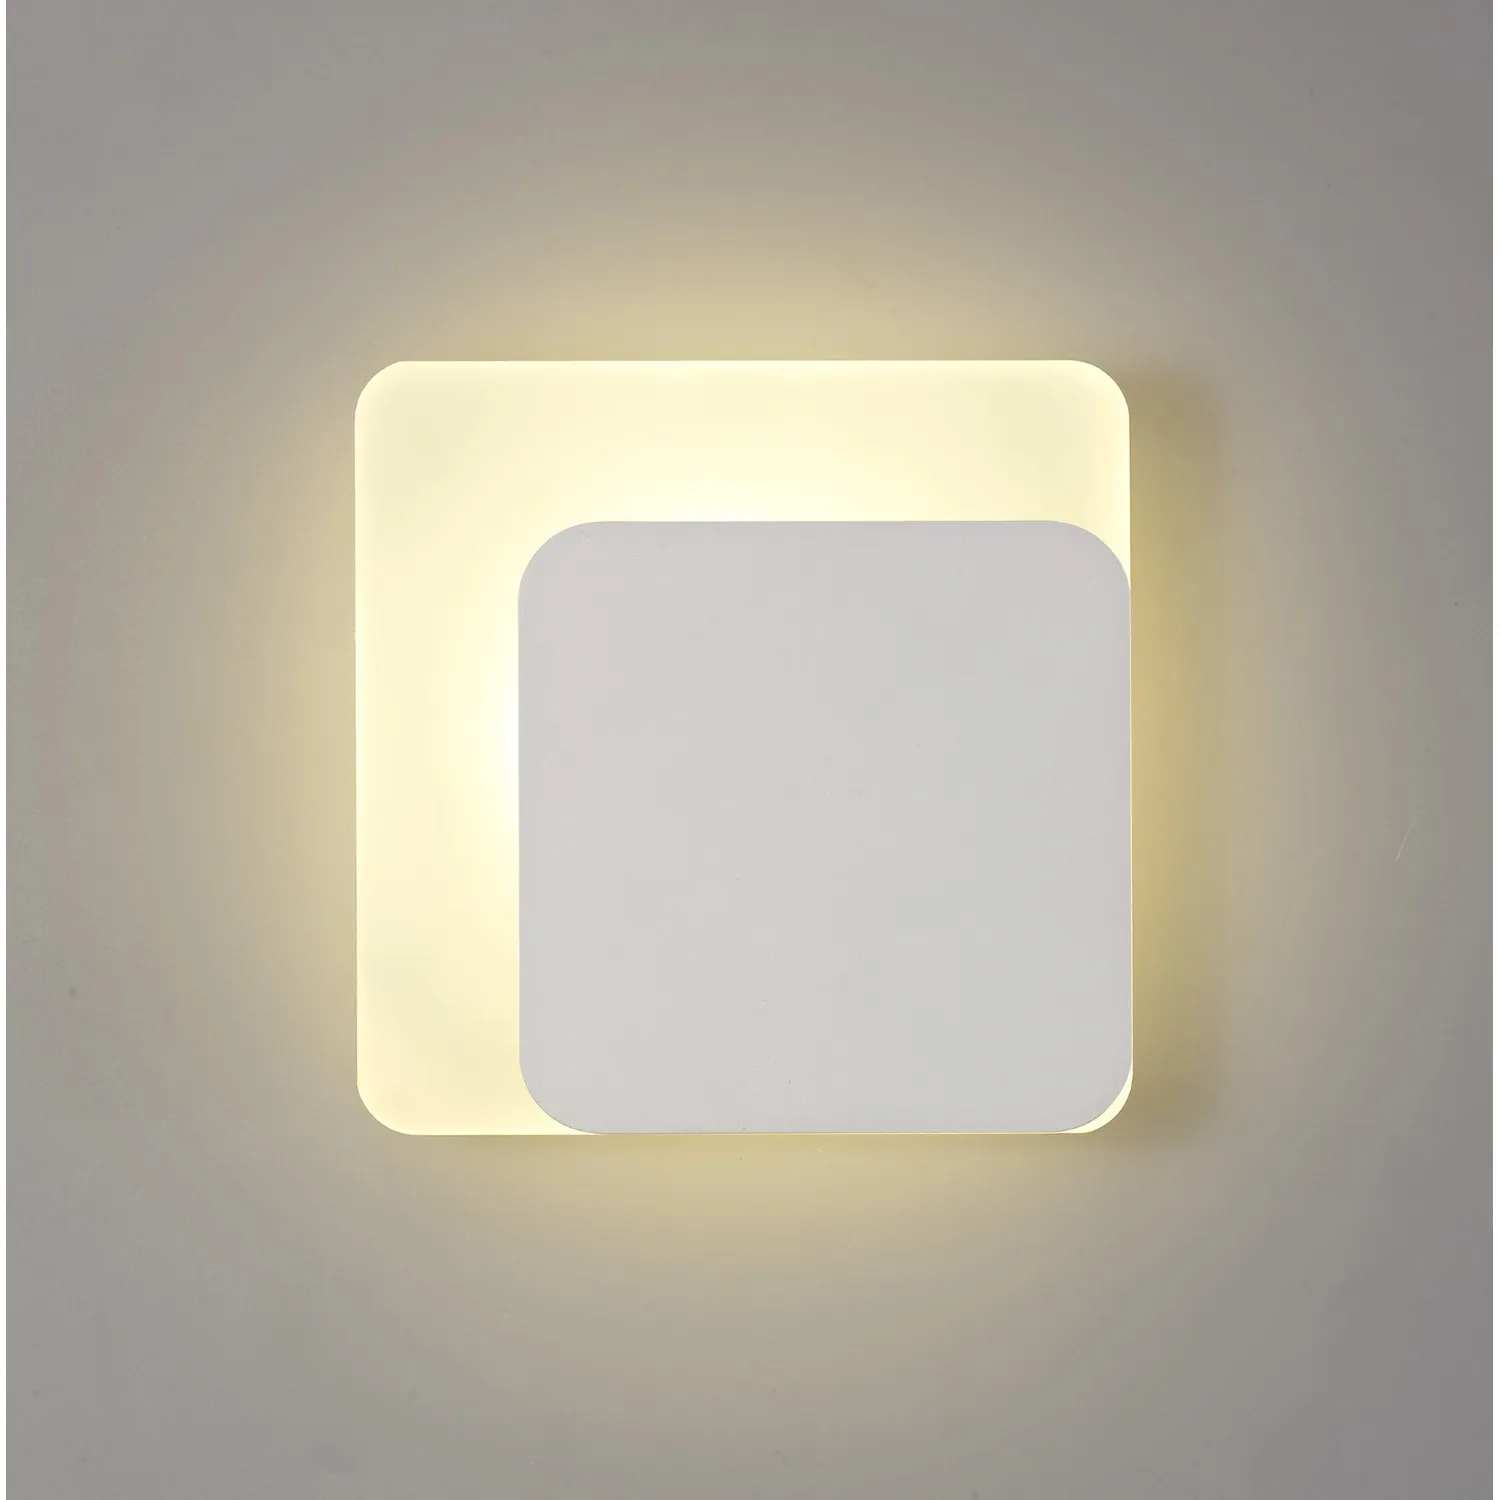 Edgware Magnetic Base Wall Lamp, 12W LED 3000K 498lm, 15 19cm Square Right Offset, Sand White Acrylic Frosted Diffuser